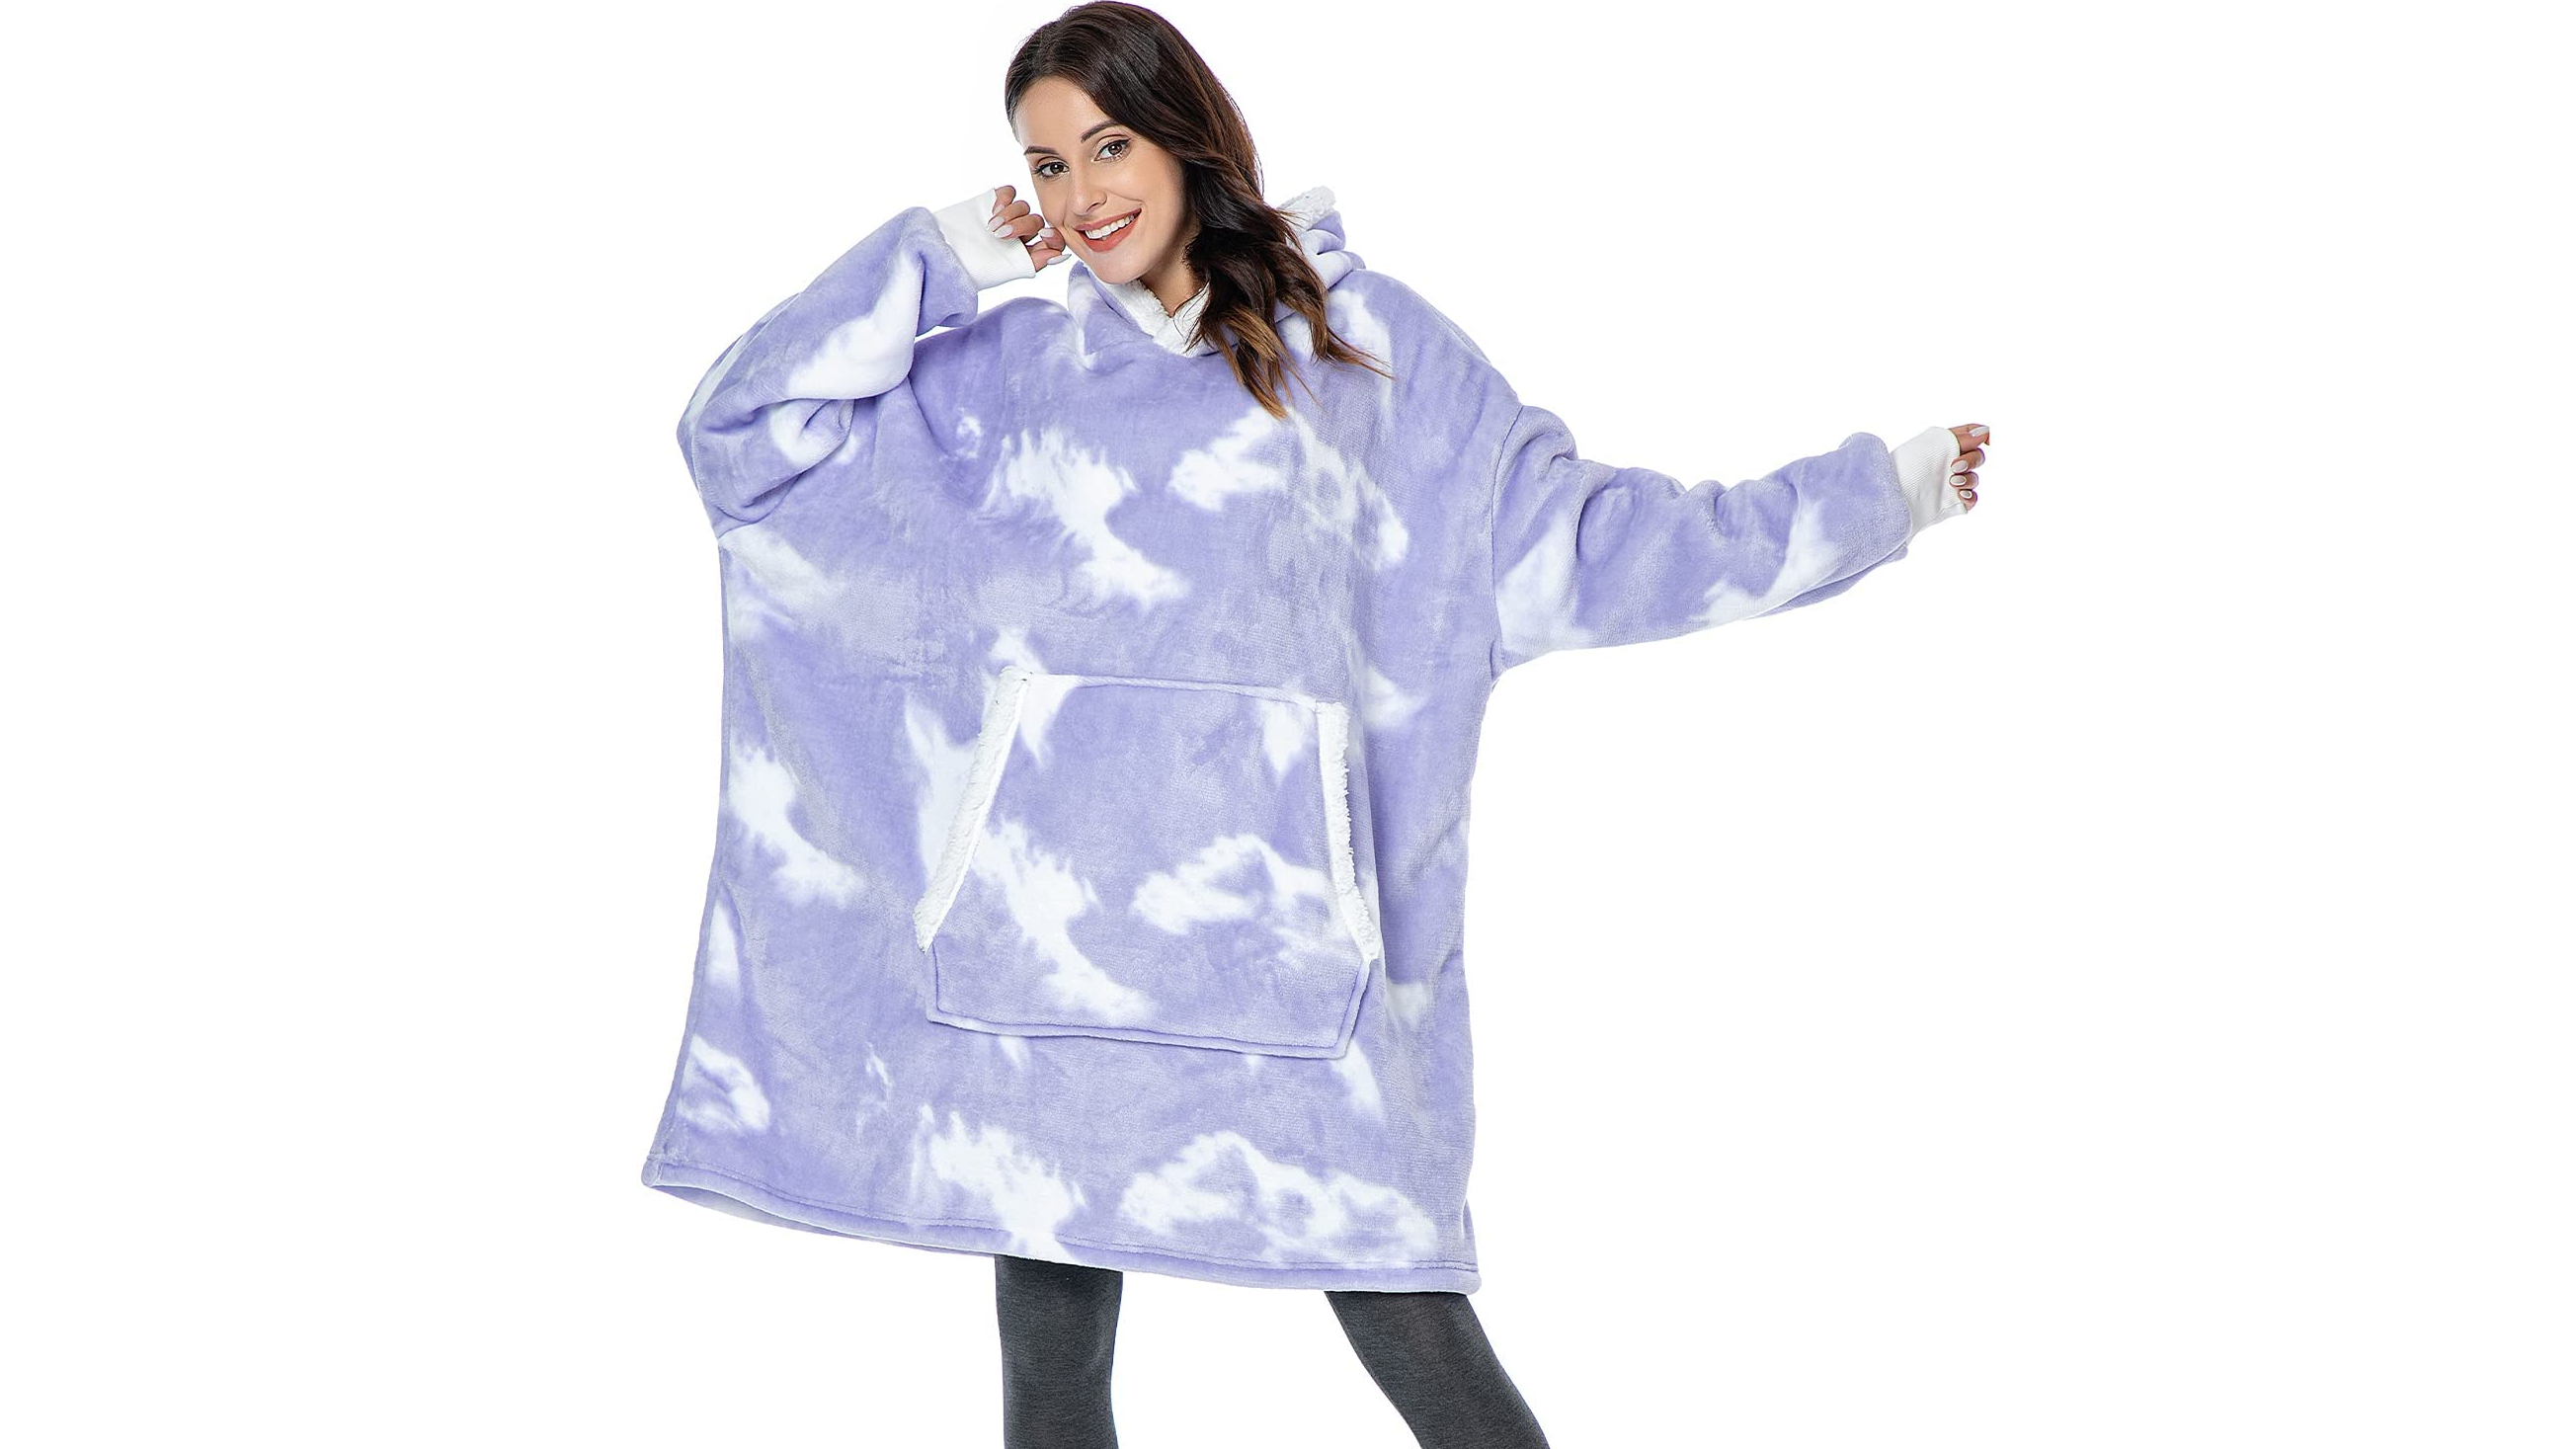 There Are Many Fun Features of The CoziHood Blanket Hoodie